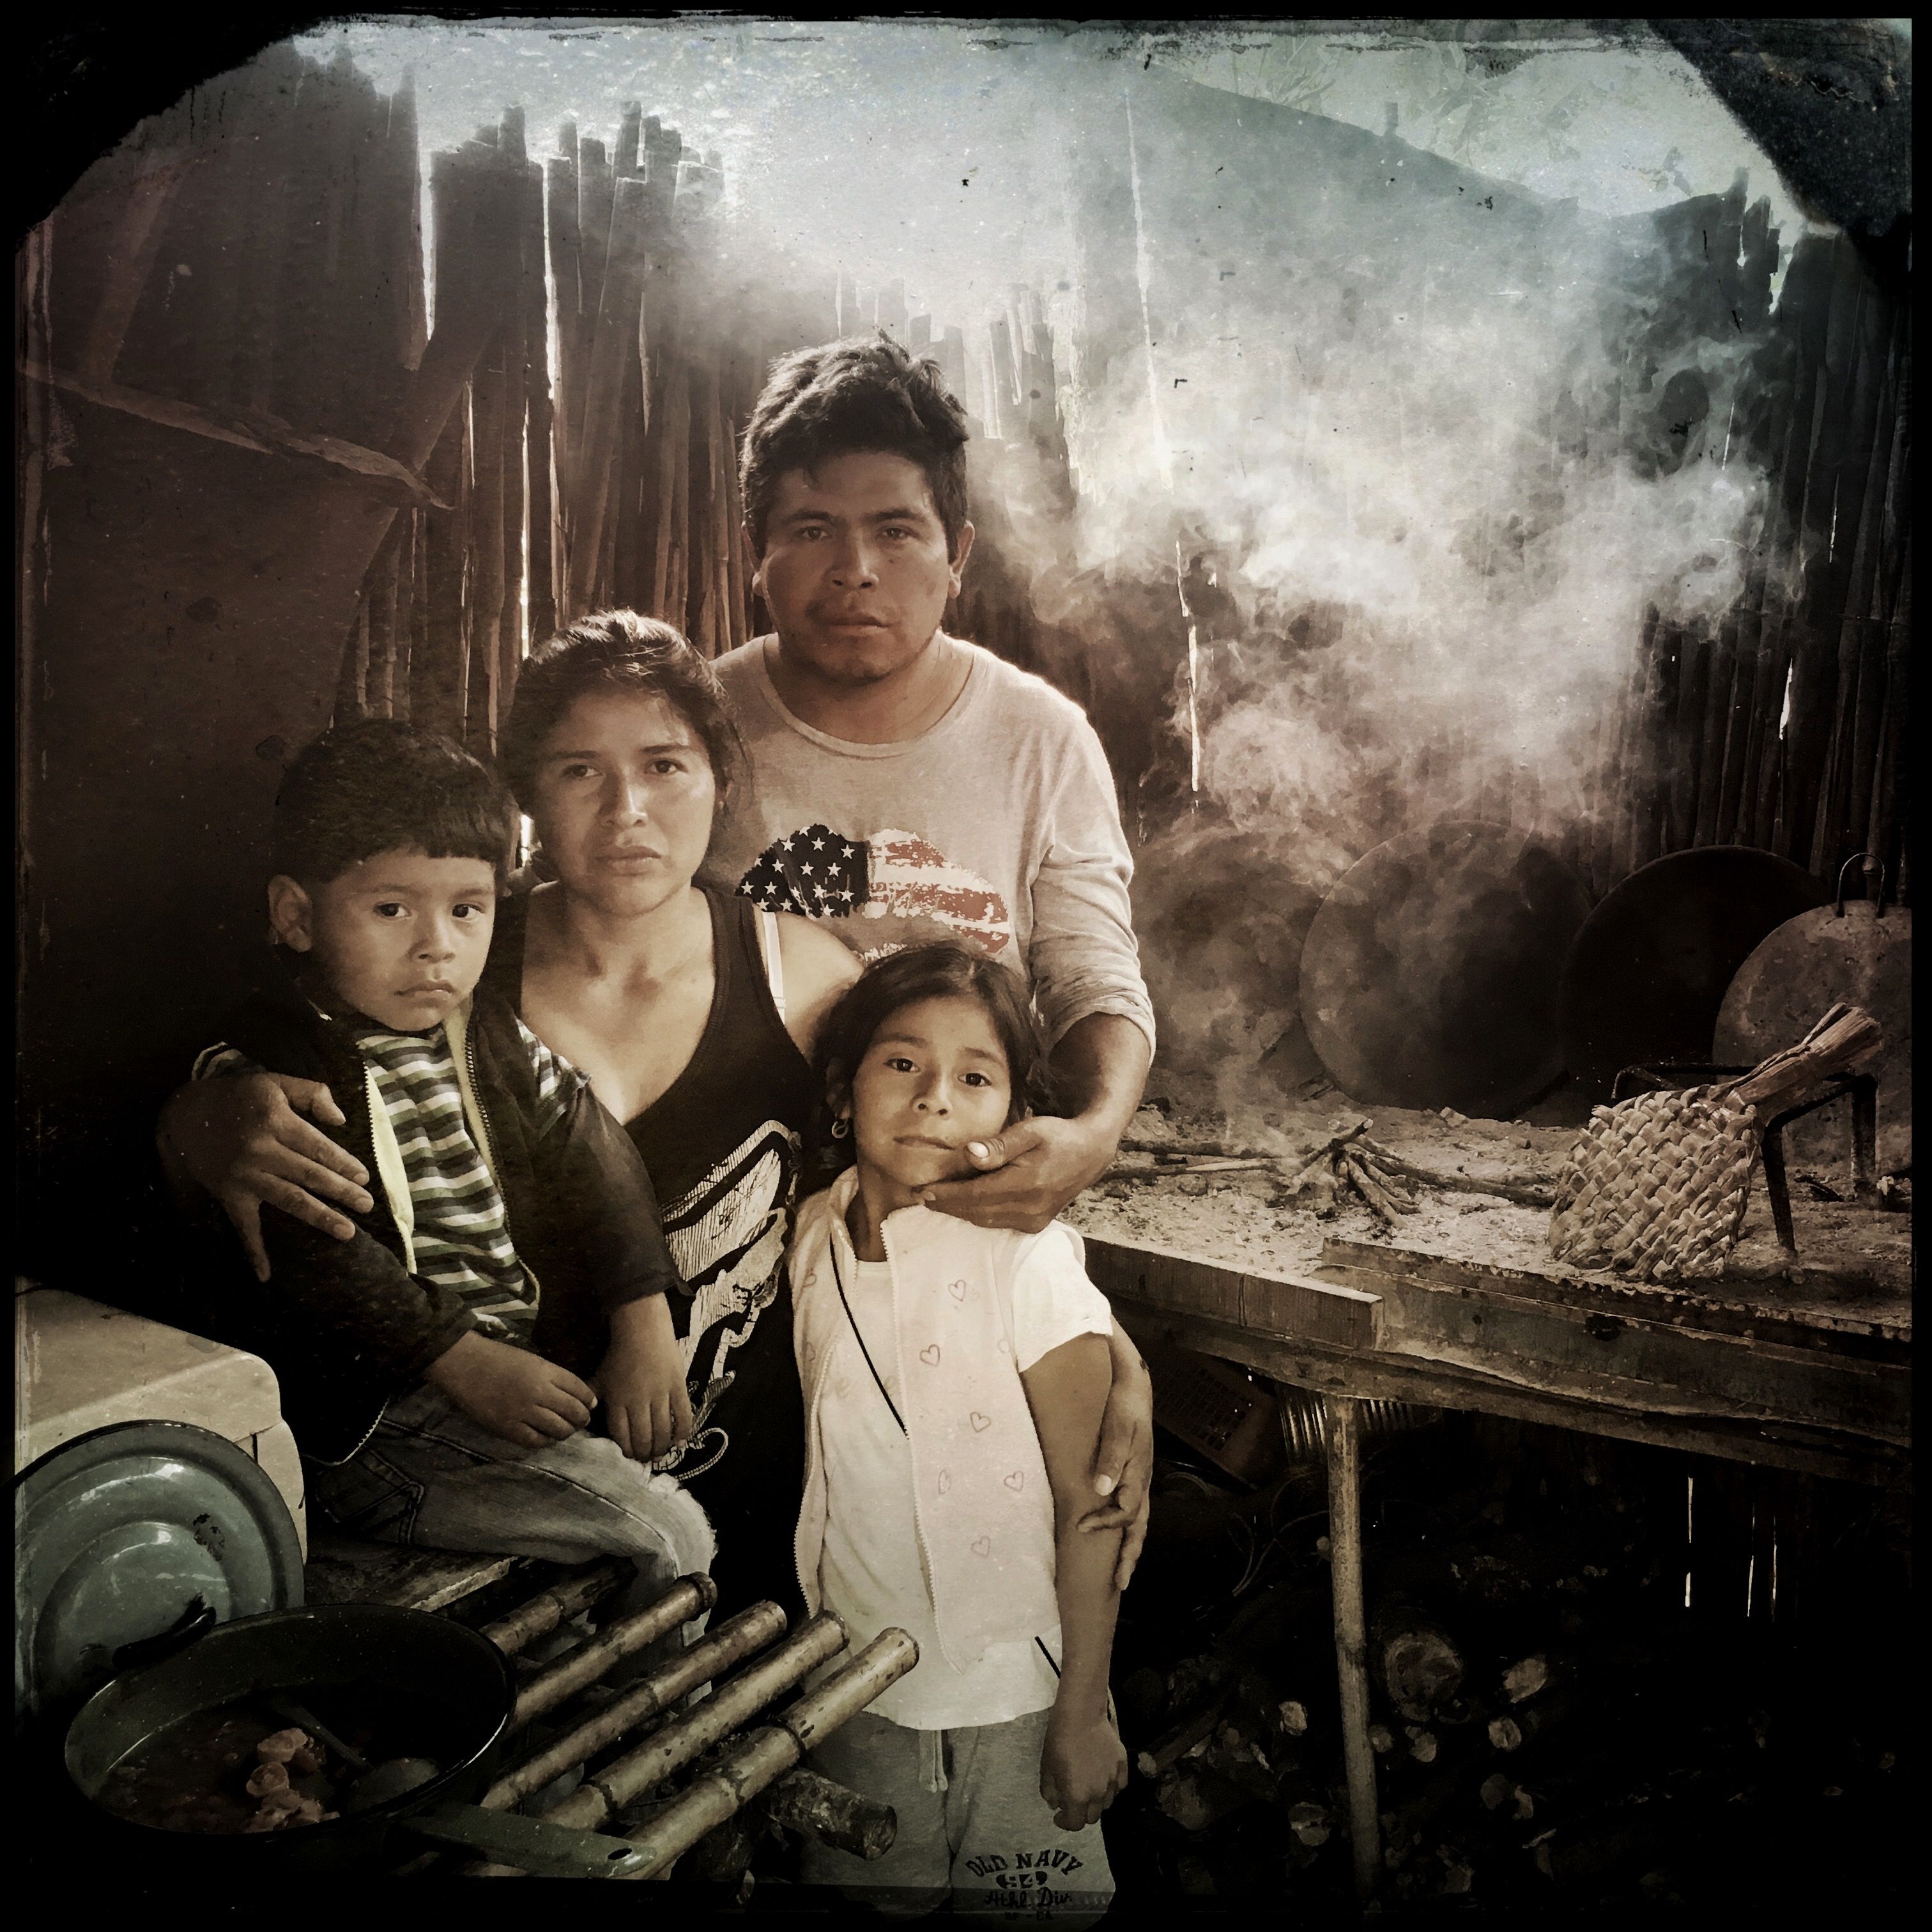 Maria García Cruz grew up with a gas stove in rural Guatemala, but she and her husband, Venancio Juárez, can't afford one. "I've never gotten used to this," she says of the smoke. Both of her children have respiratory problems. Photo by Lynn Johnson. Guatemala, 2017.